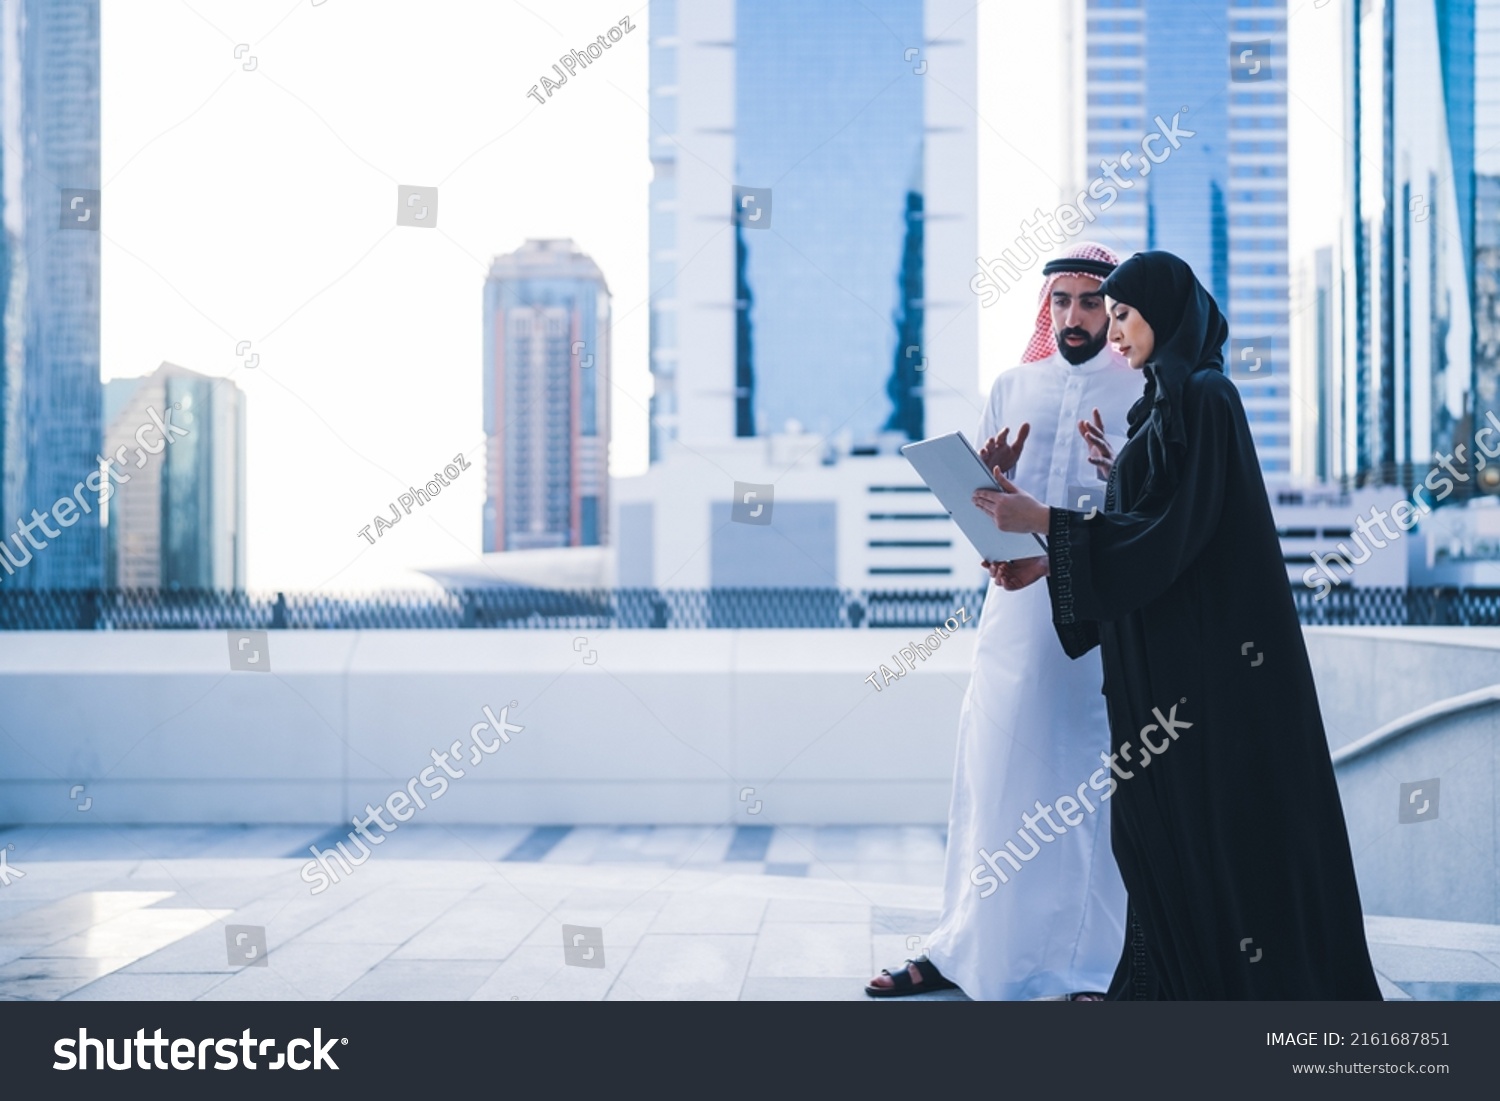 Arab couples or colleagues working together on tablet or laptop wearing traditional clothes and abaya. Muslim employees Saudi or Emirati business woman and man #2161687851